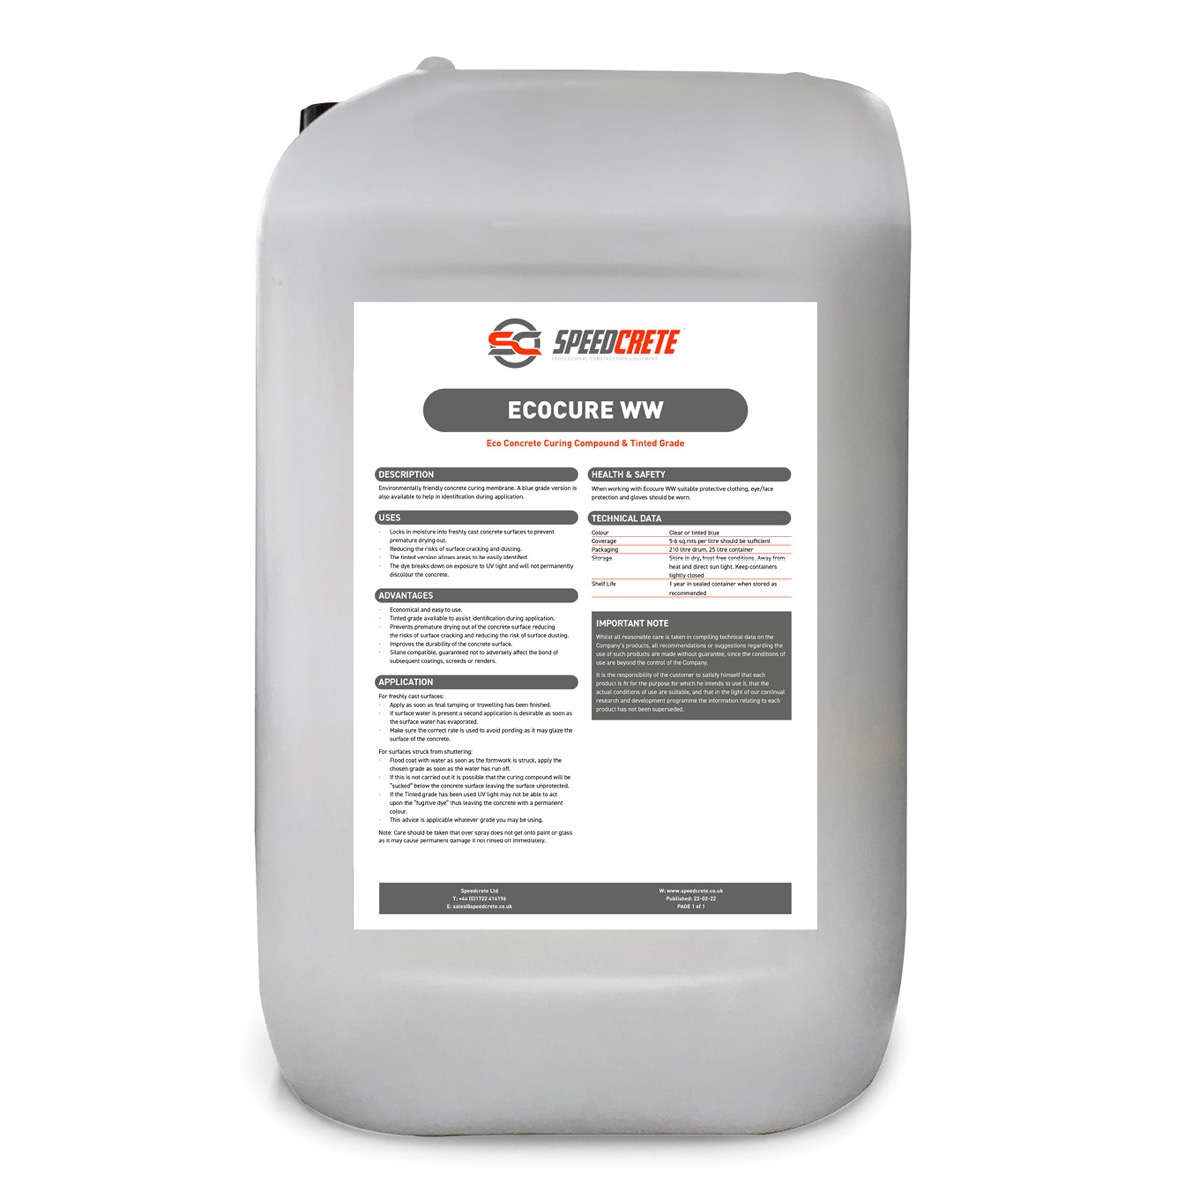 Ecocure Water Based Concrete Curing Compound locks in moisture into freshly cast concrete surfaces to prevent premature drying out, this reduces the risks of surface cracking and dusting. Available from Speedcrete, United Kingdom.